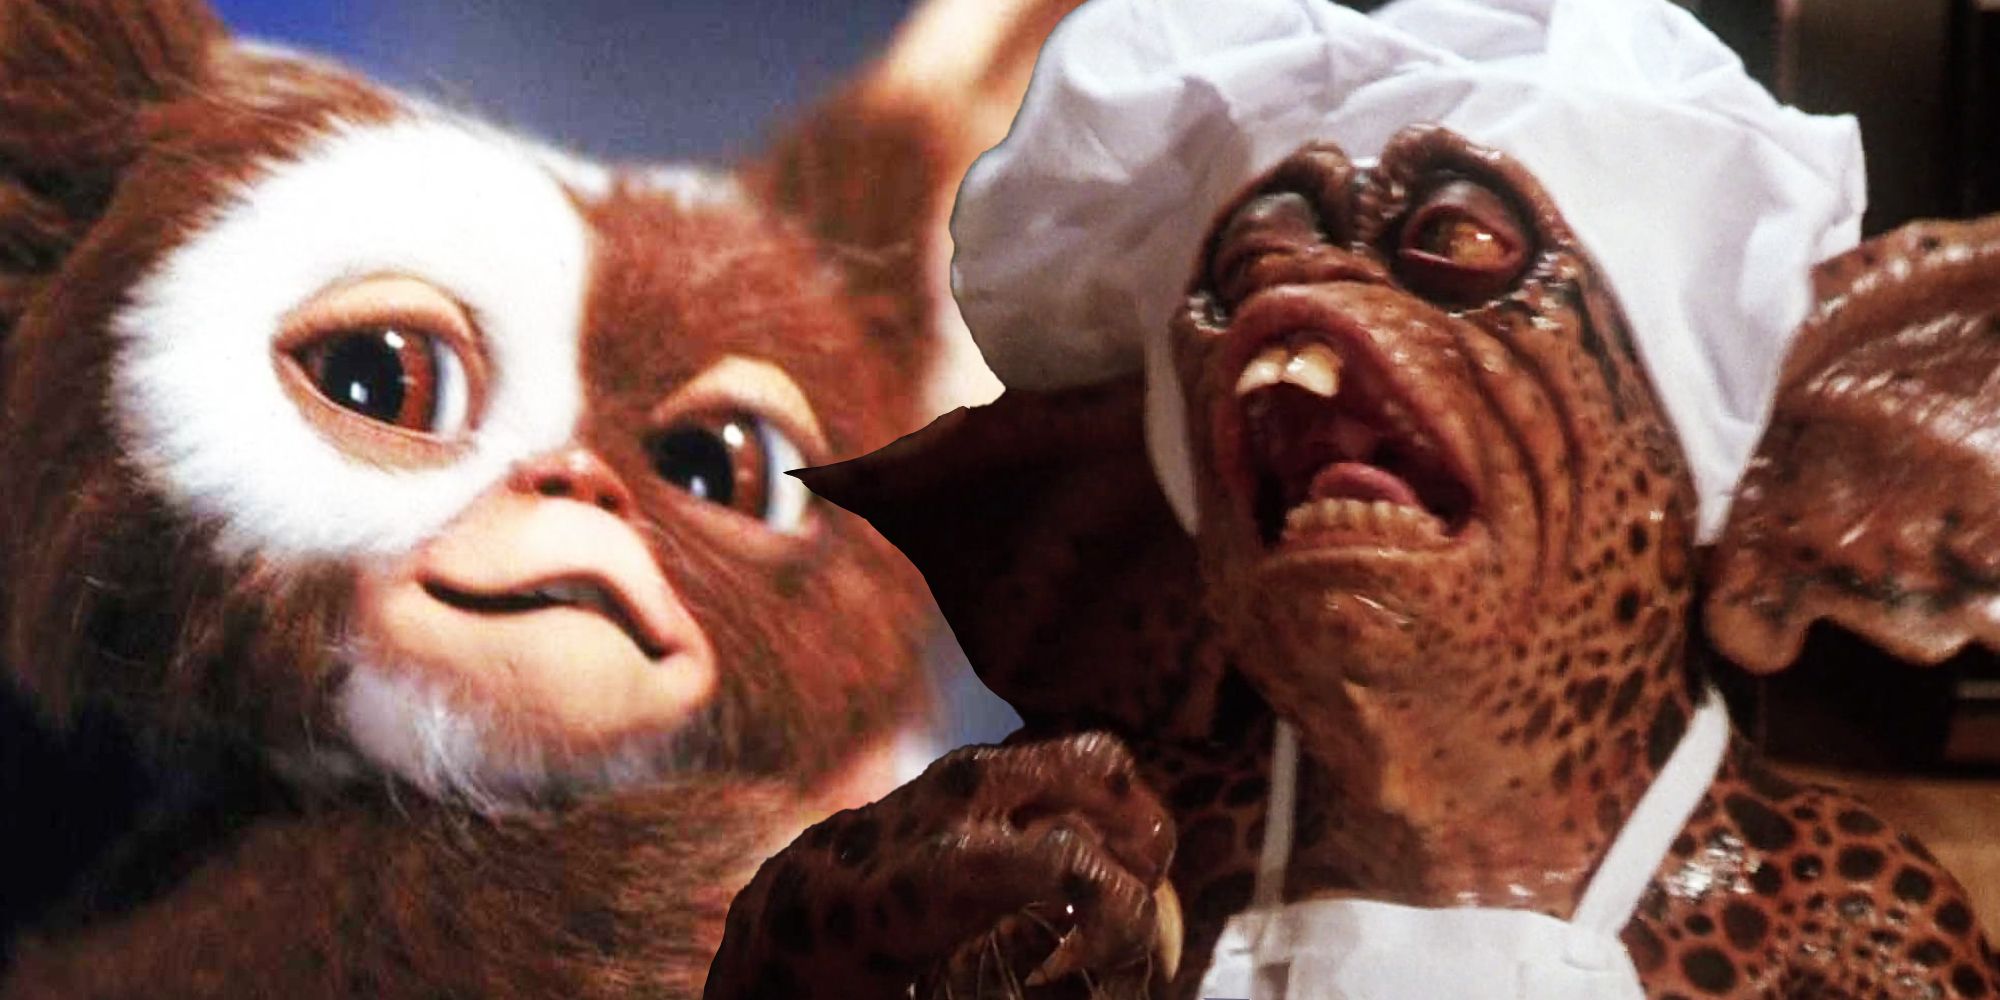 Chef Gremlin from Gremlins 2 and Gizmo